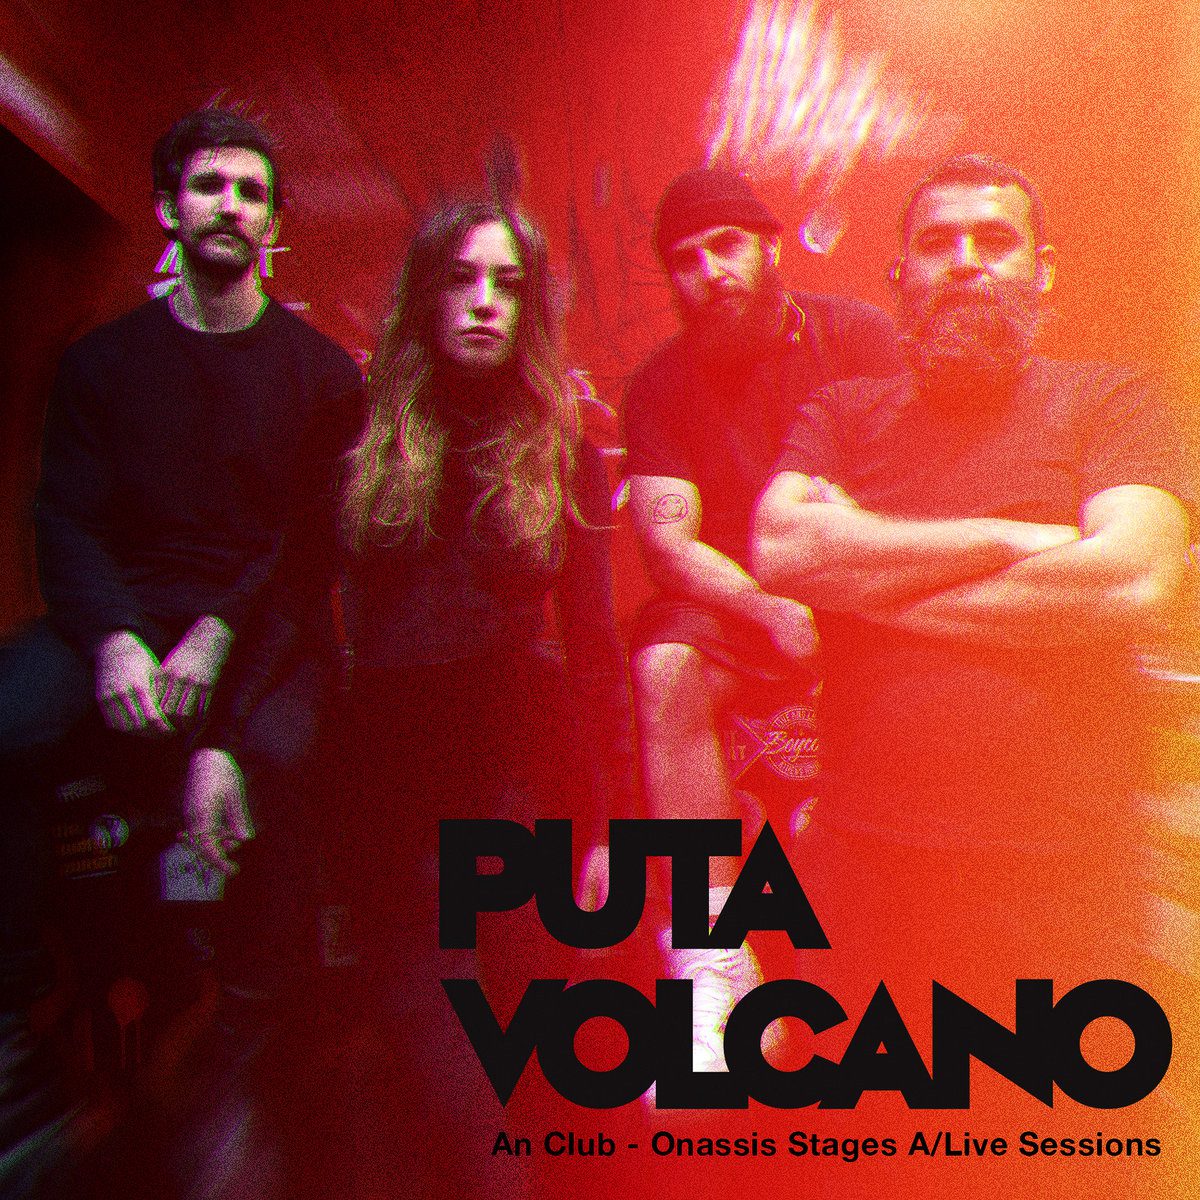 Puta Volcano – An Club – Onassis Stages A/Live Sessions (2021)